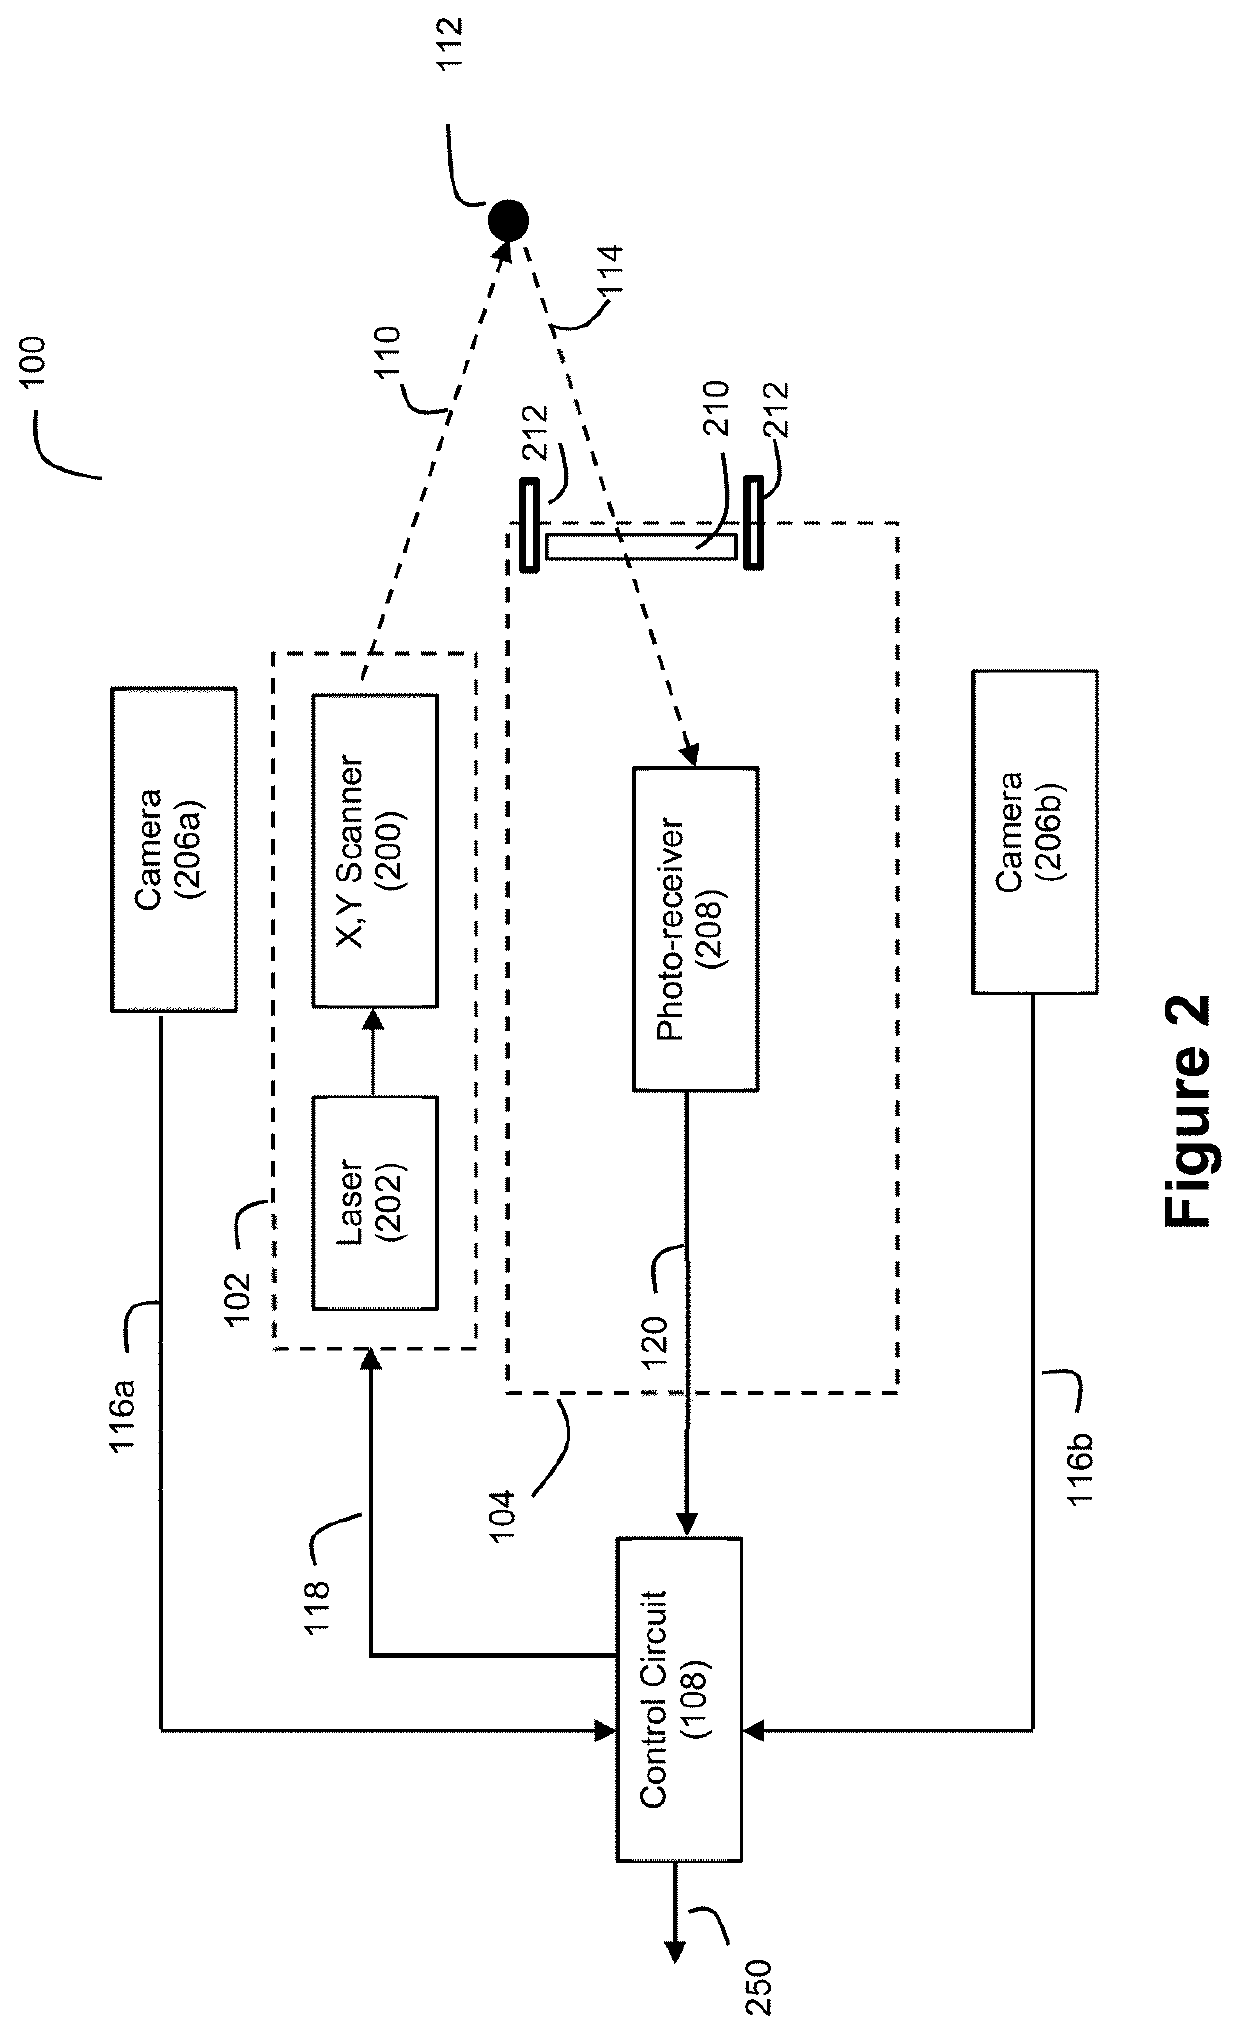 Ladar system and method with adaptive pulse duration